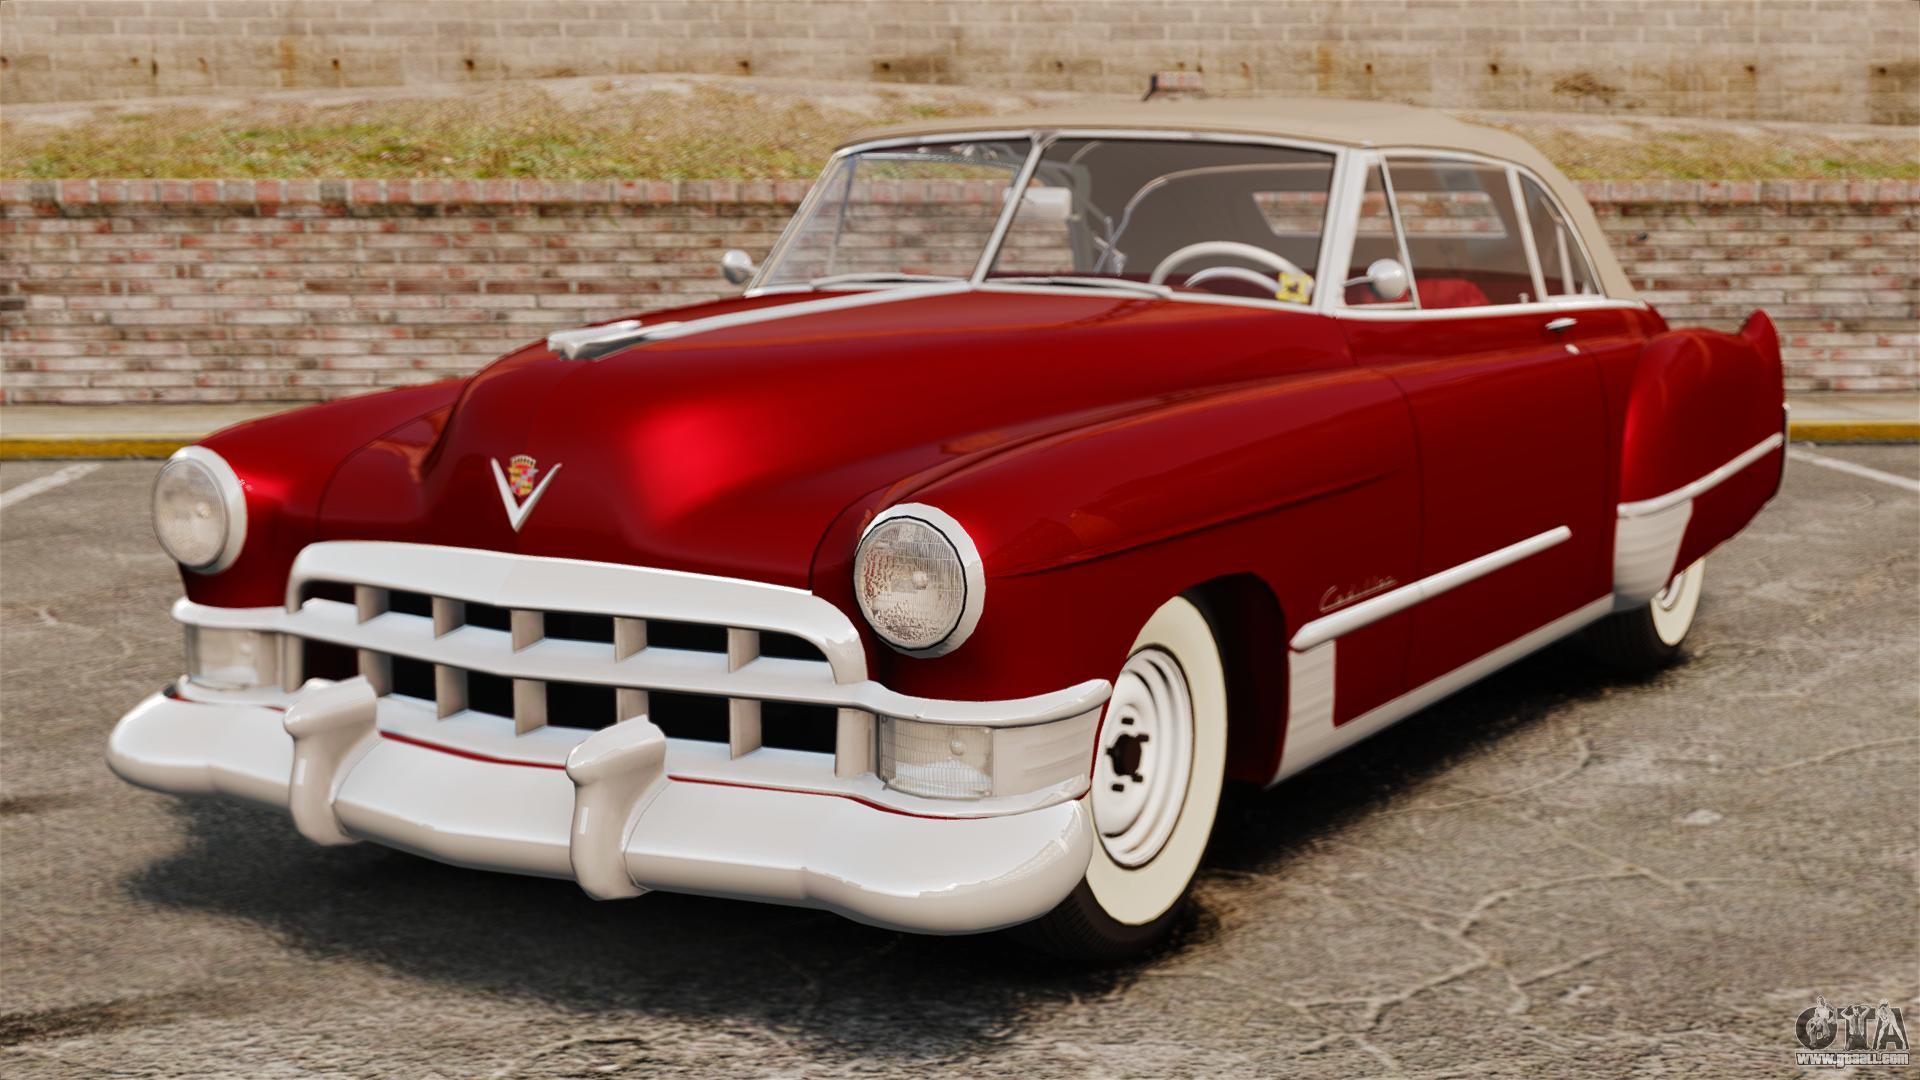 1949 Cadillac Sixty-two Convertible #1